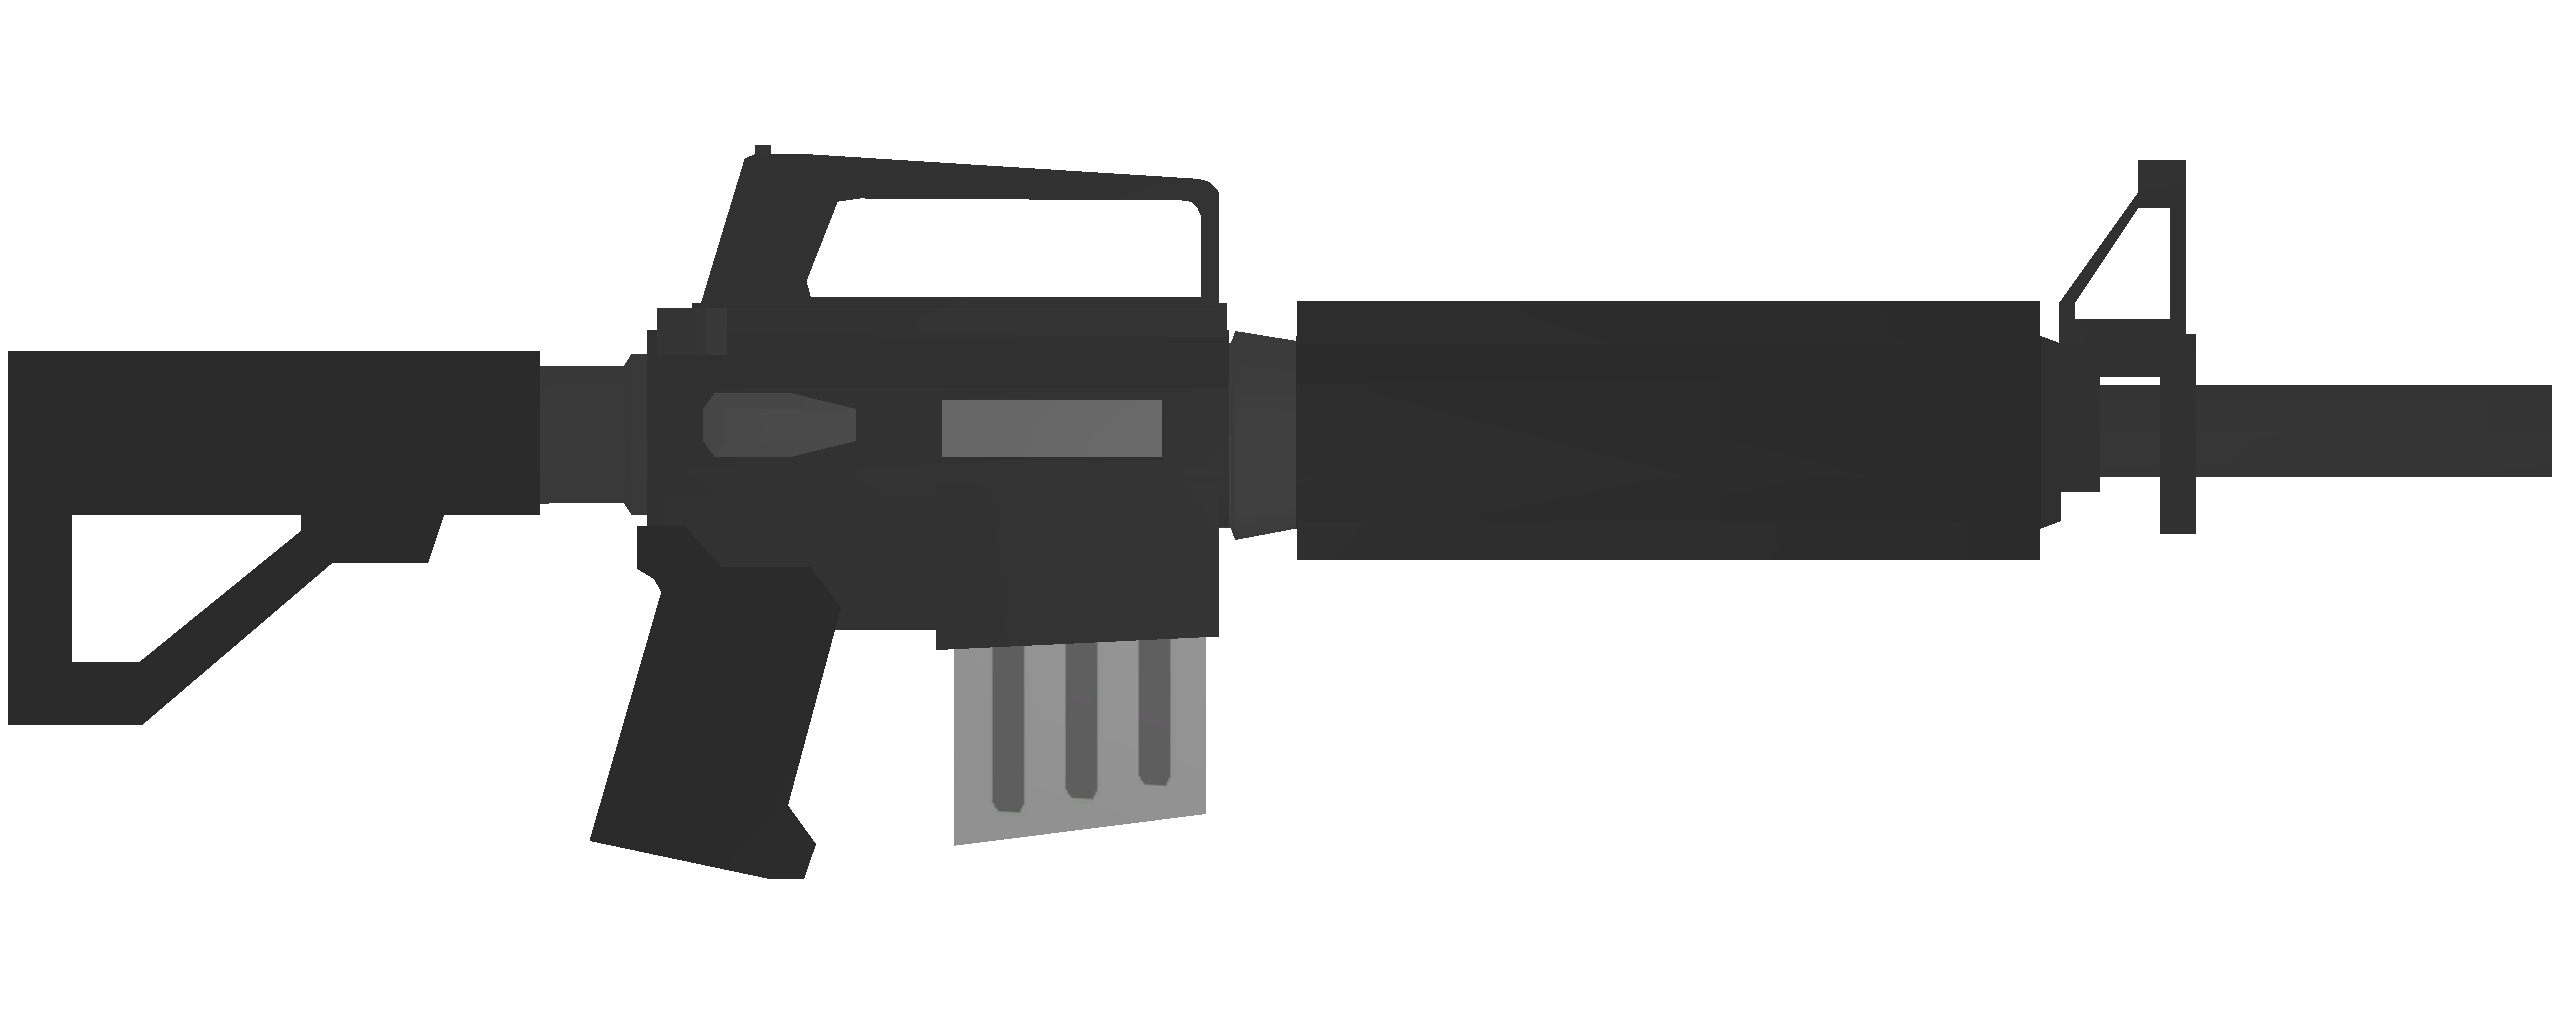 Unturned - Kuwait Items Redux + ID List for Magazines and Attachments - Assault Rifles - D1AC171